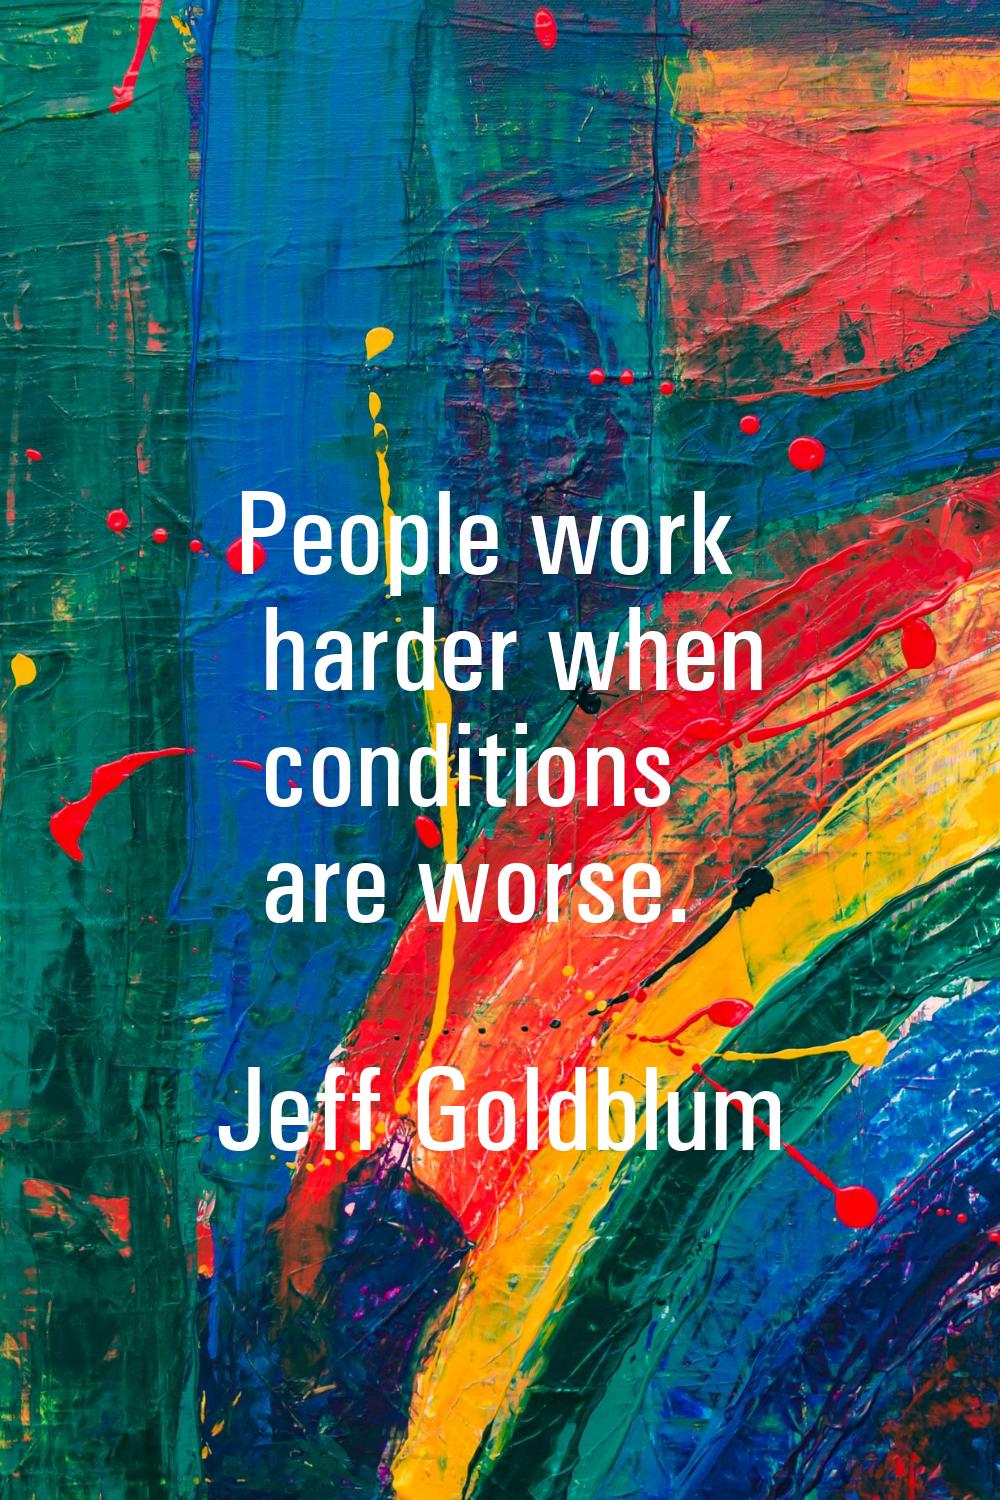 People work harder when conditions are worse.